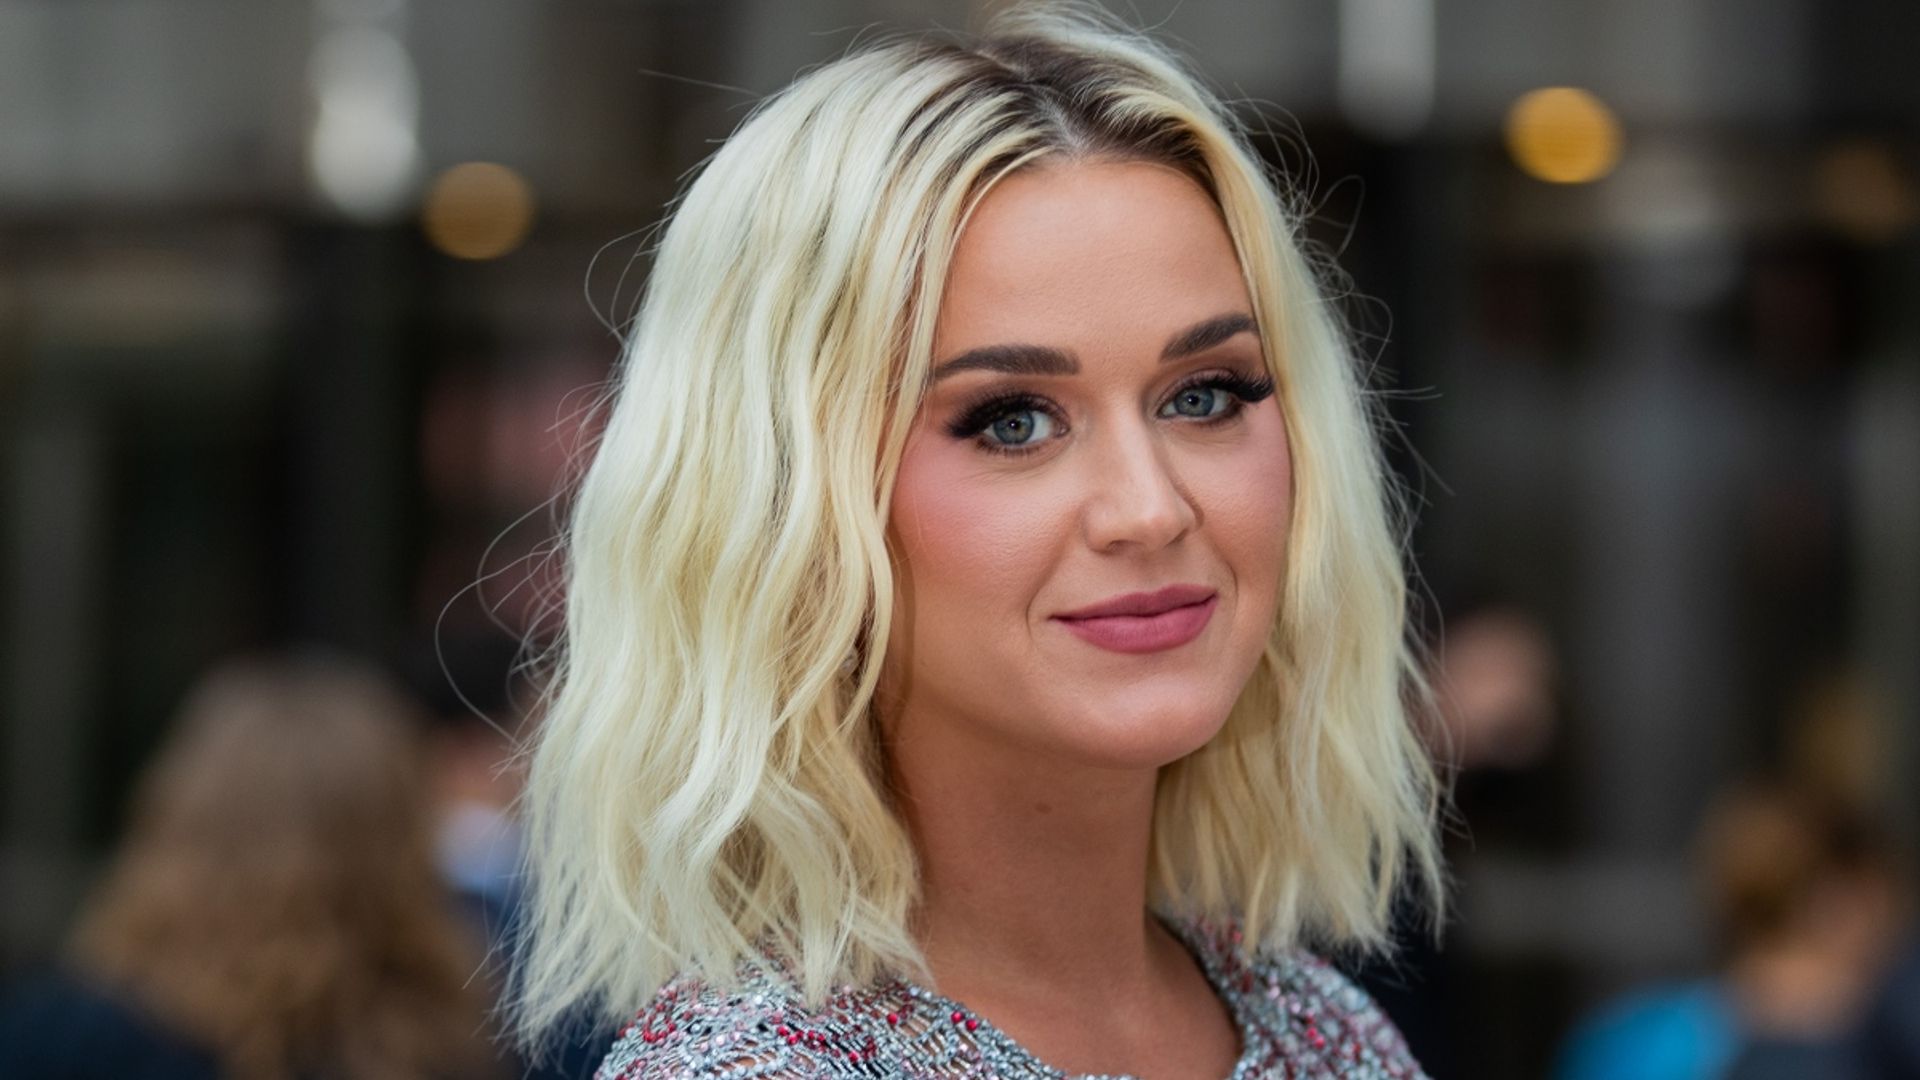 Katy Perry sets the record straight on big music debate on American Idol